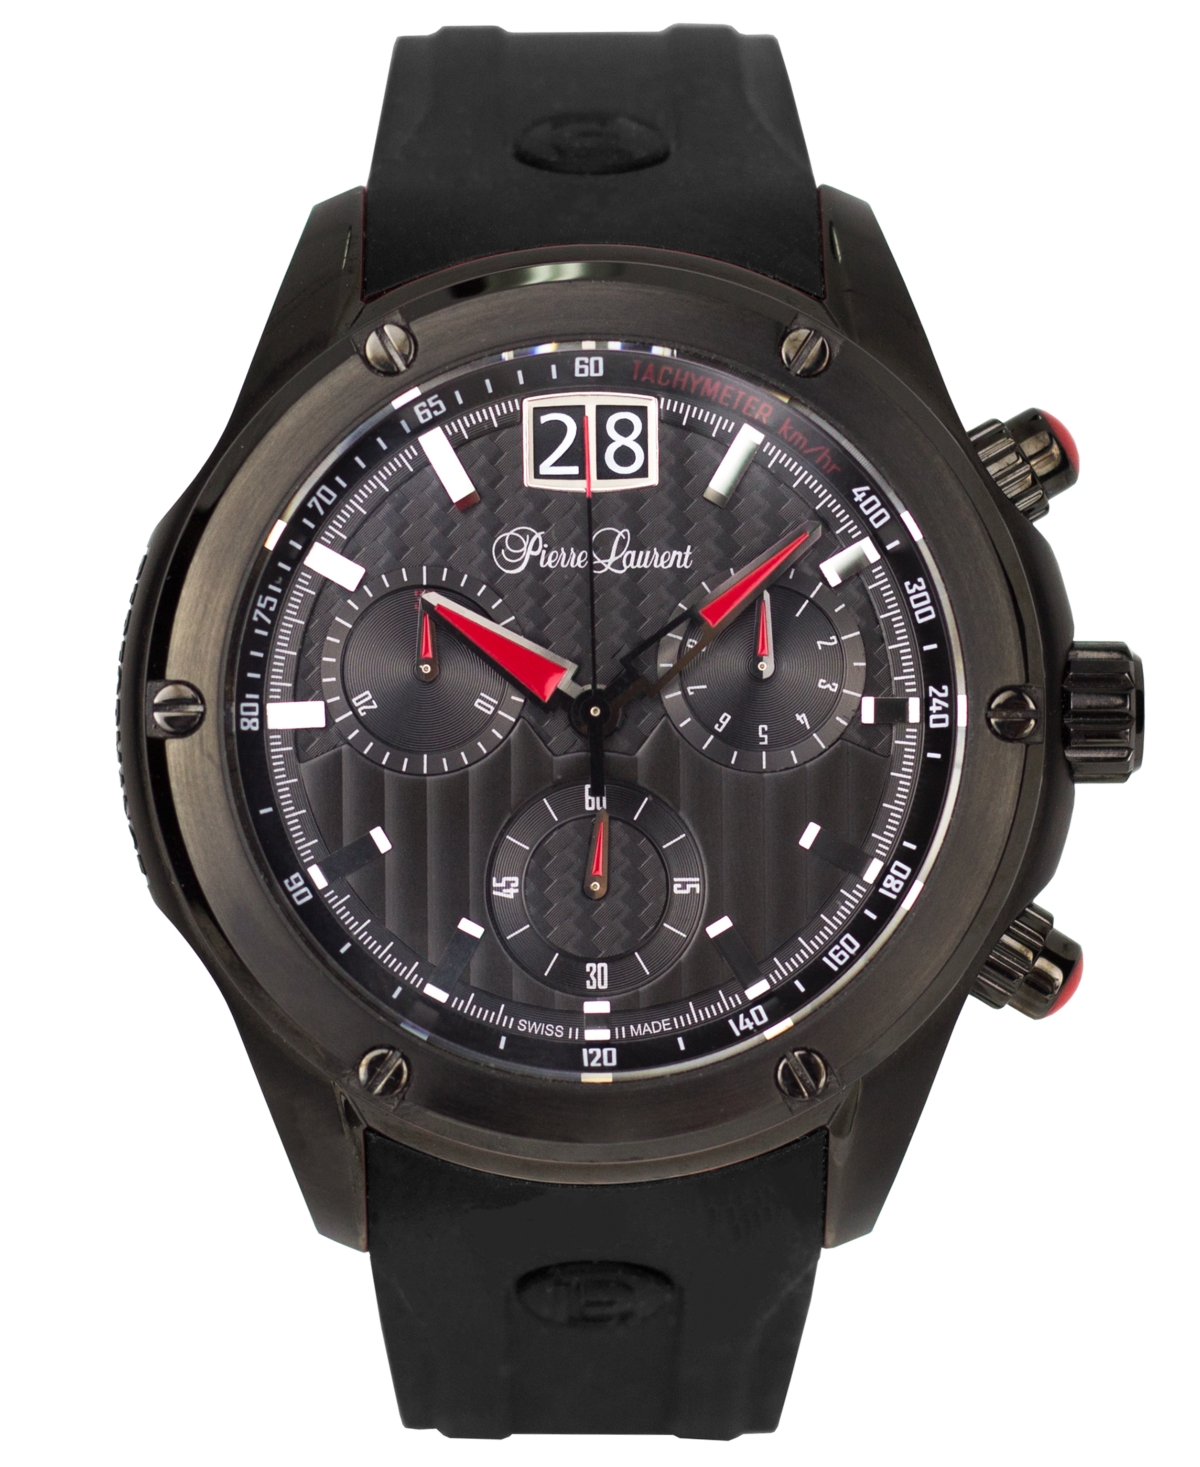 Pierre Laurent Men's Performance Swiss Chronograph Stainless Steel Bracelet Watch 45mm In Black Pvd Over Stainless Steel